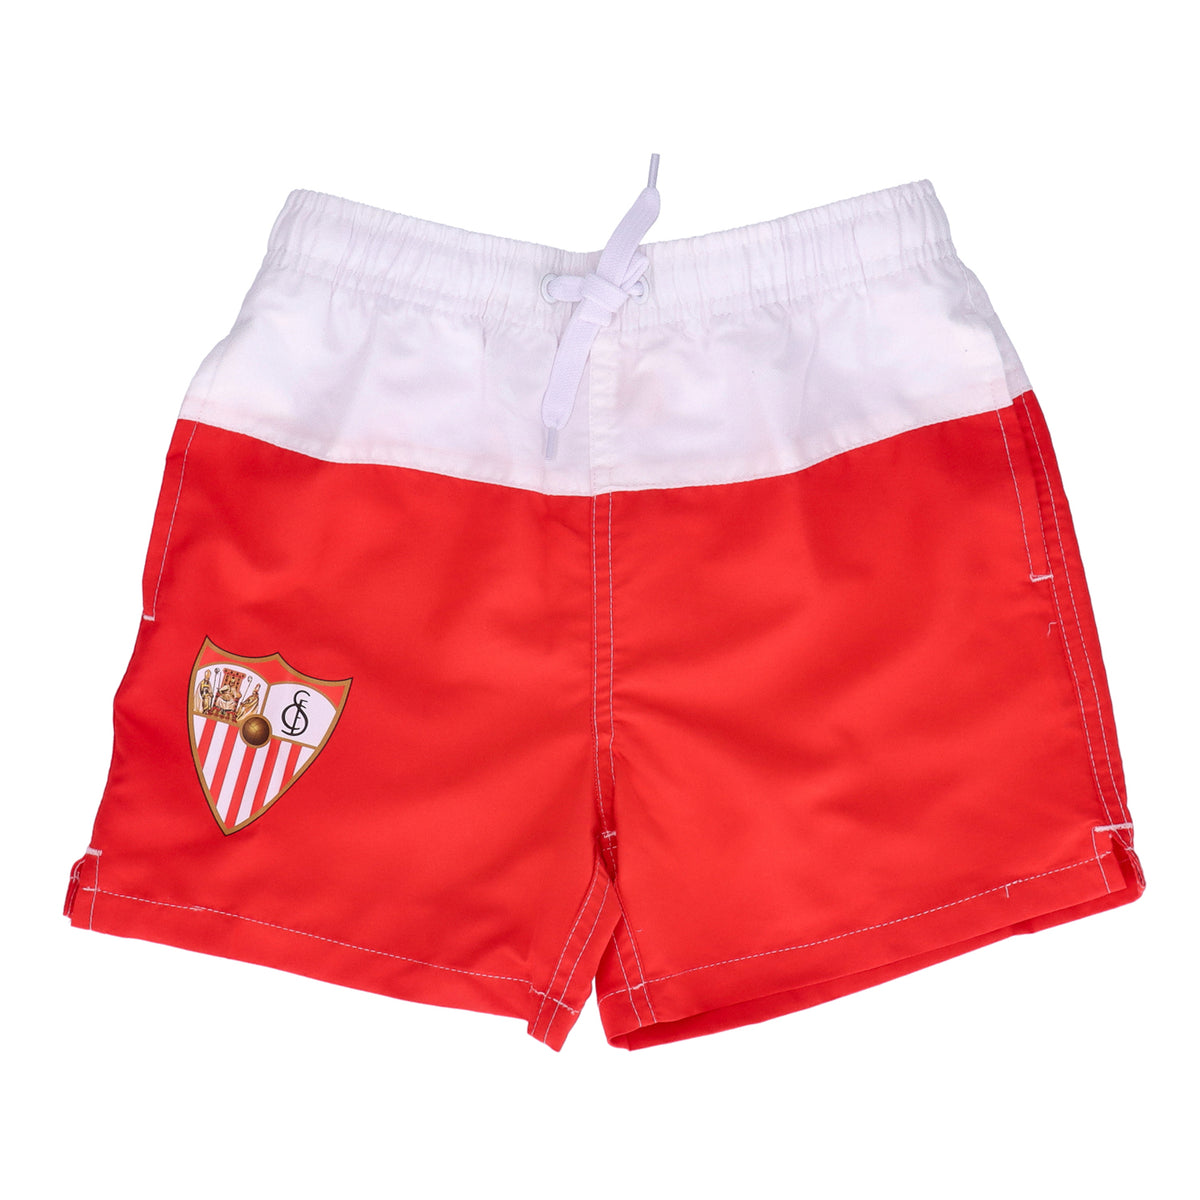 Men white and red swimming shorts